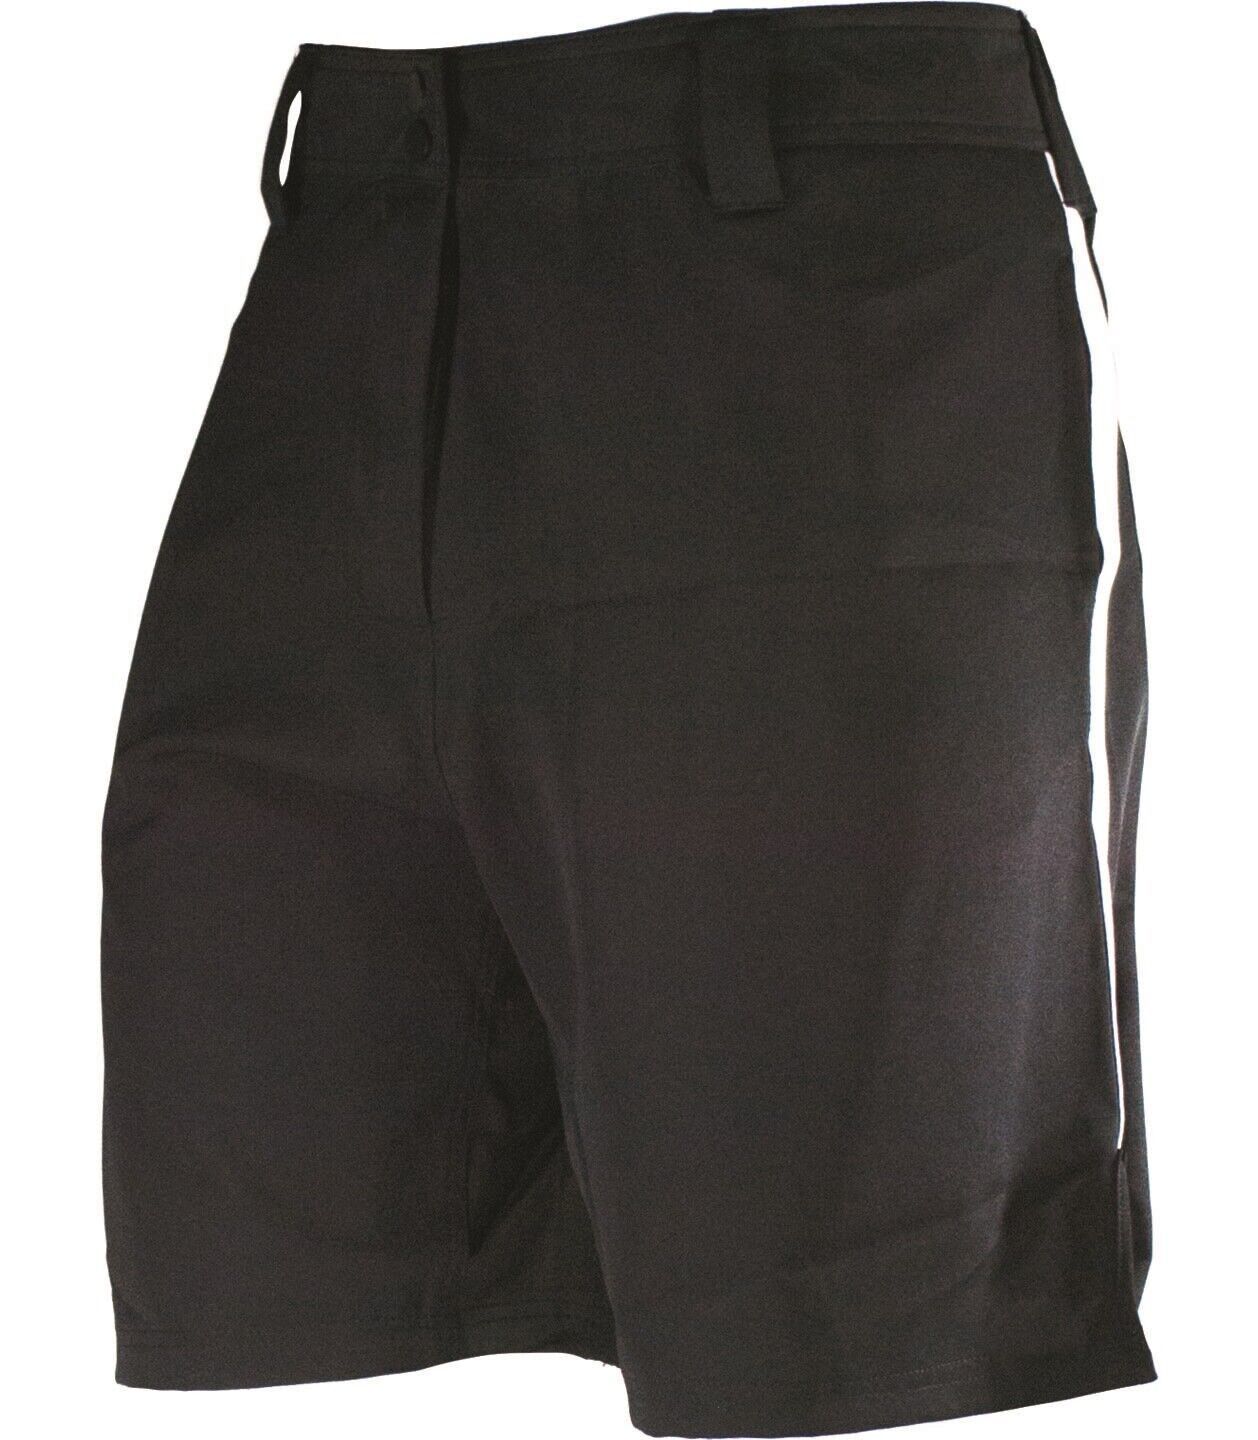 Cliff Keen | K1865 | Professional Football Referee Shorts | Official's Choice! - $49.99